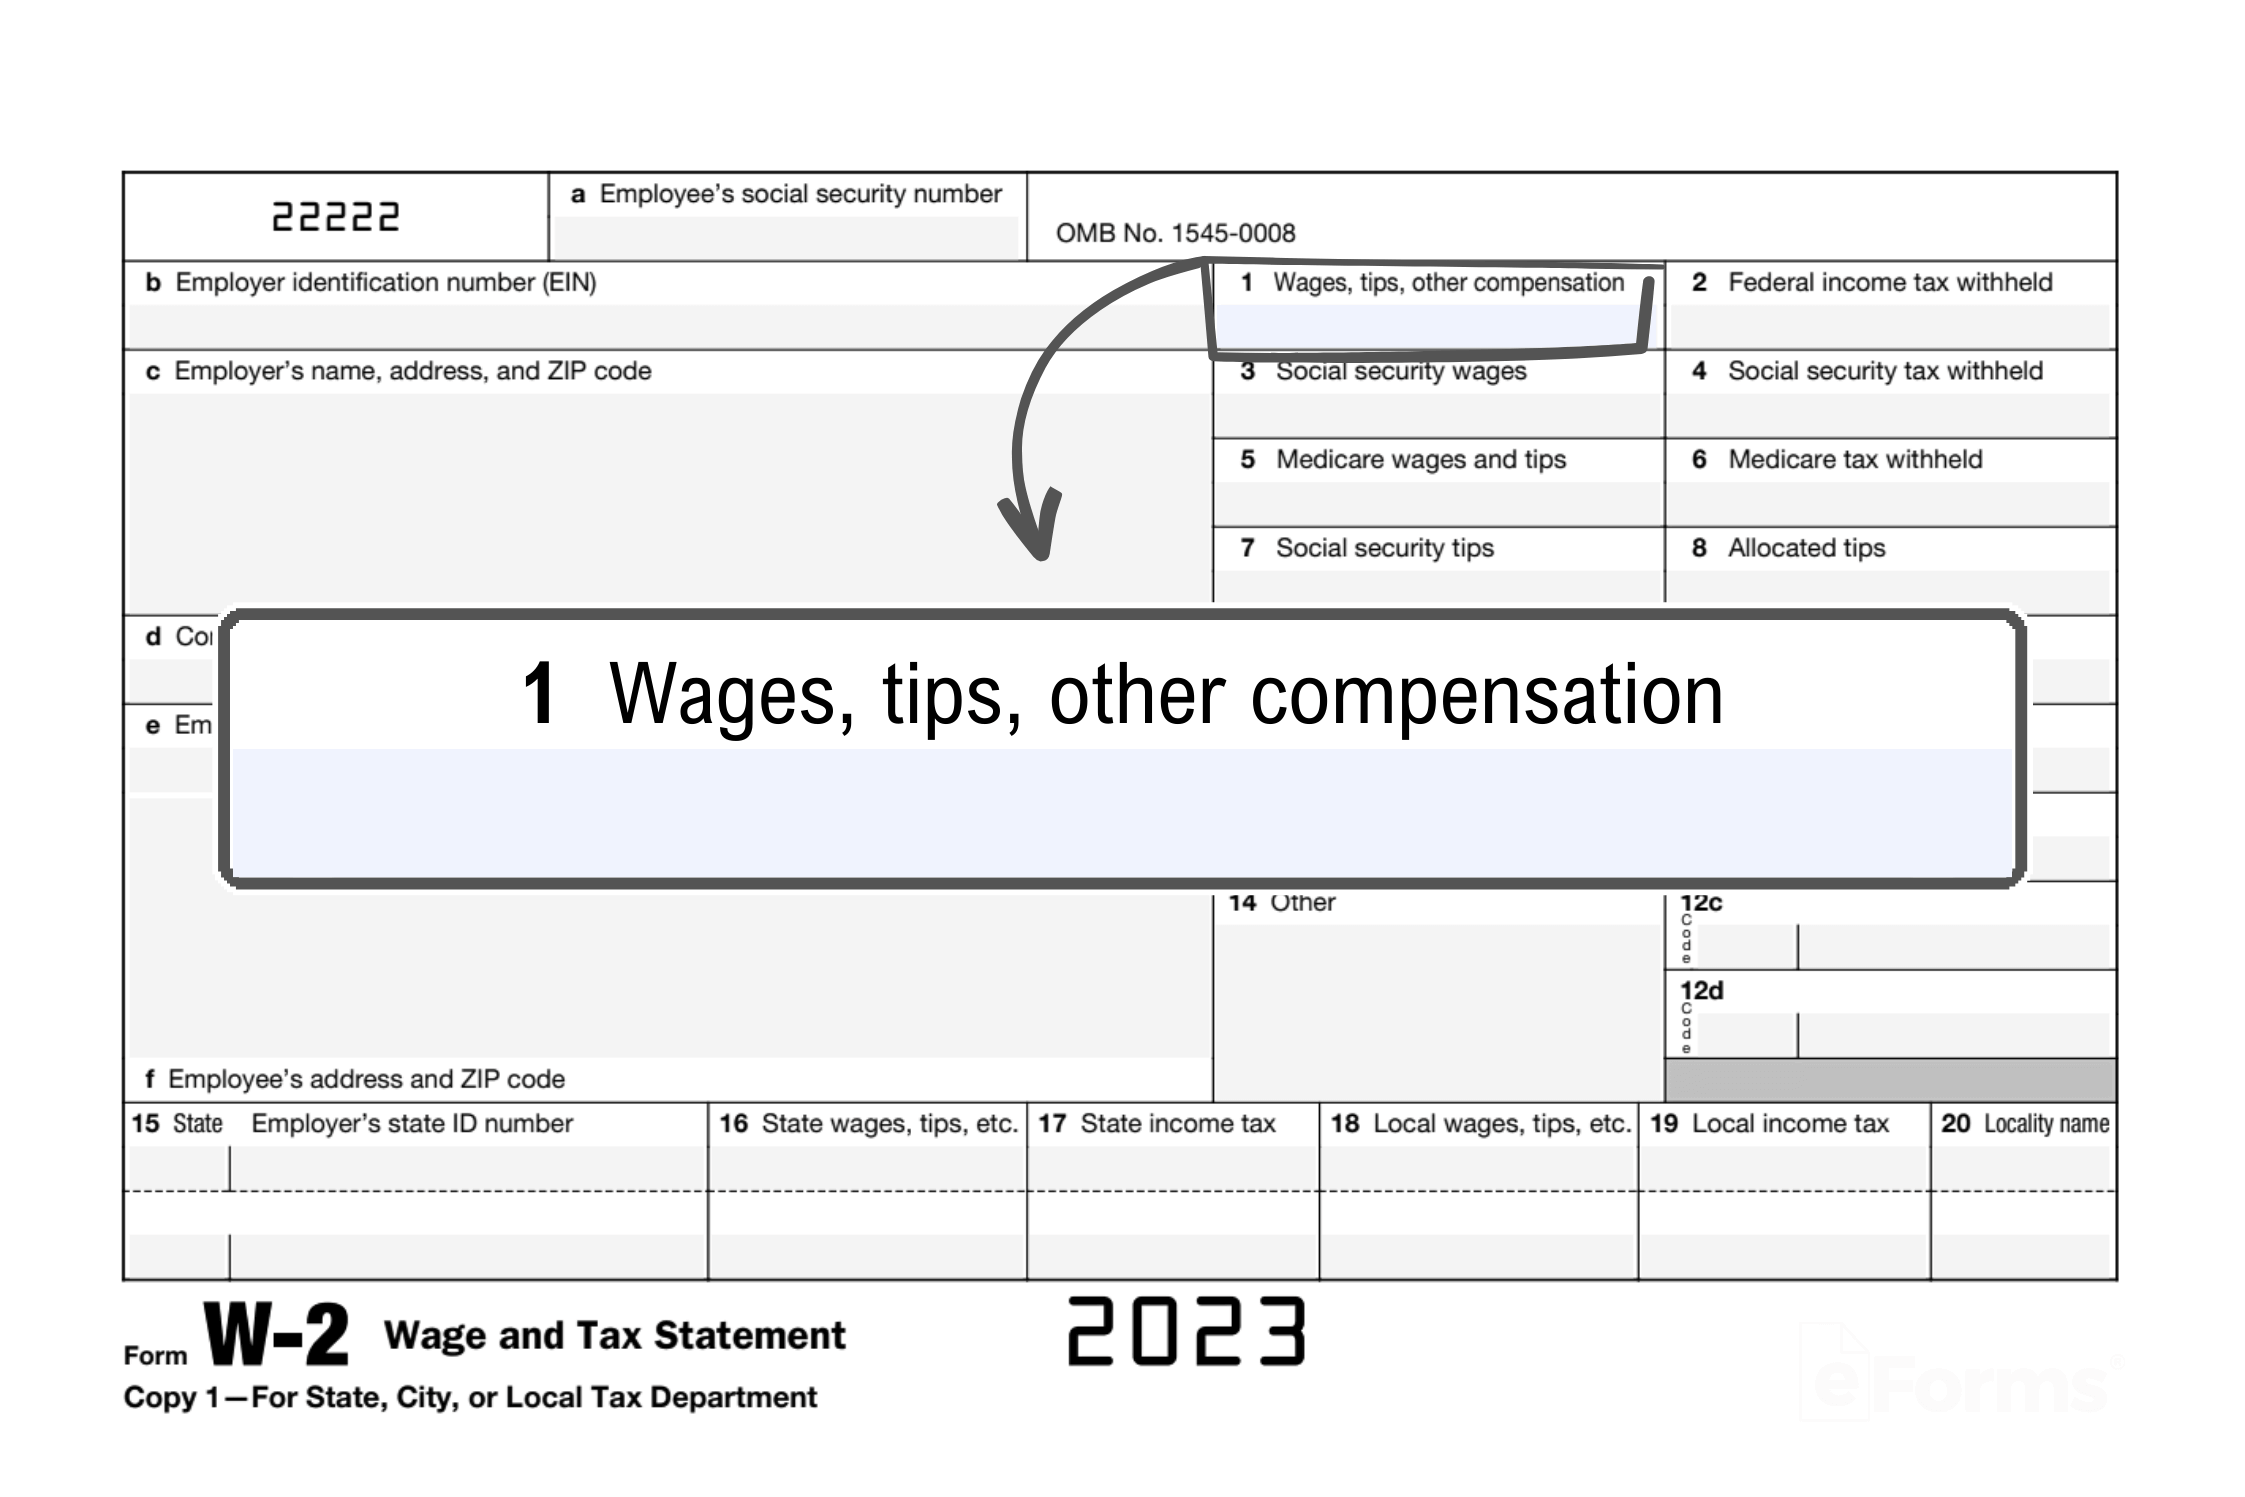 Free Irs Form W-2 | Wage And Tax Statement - Pdf – Eforms intended for How To Create A W2 Form